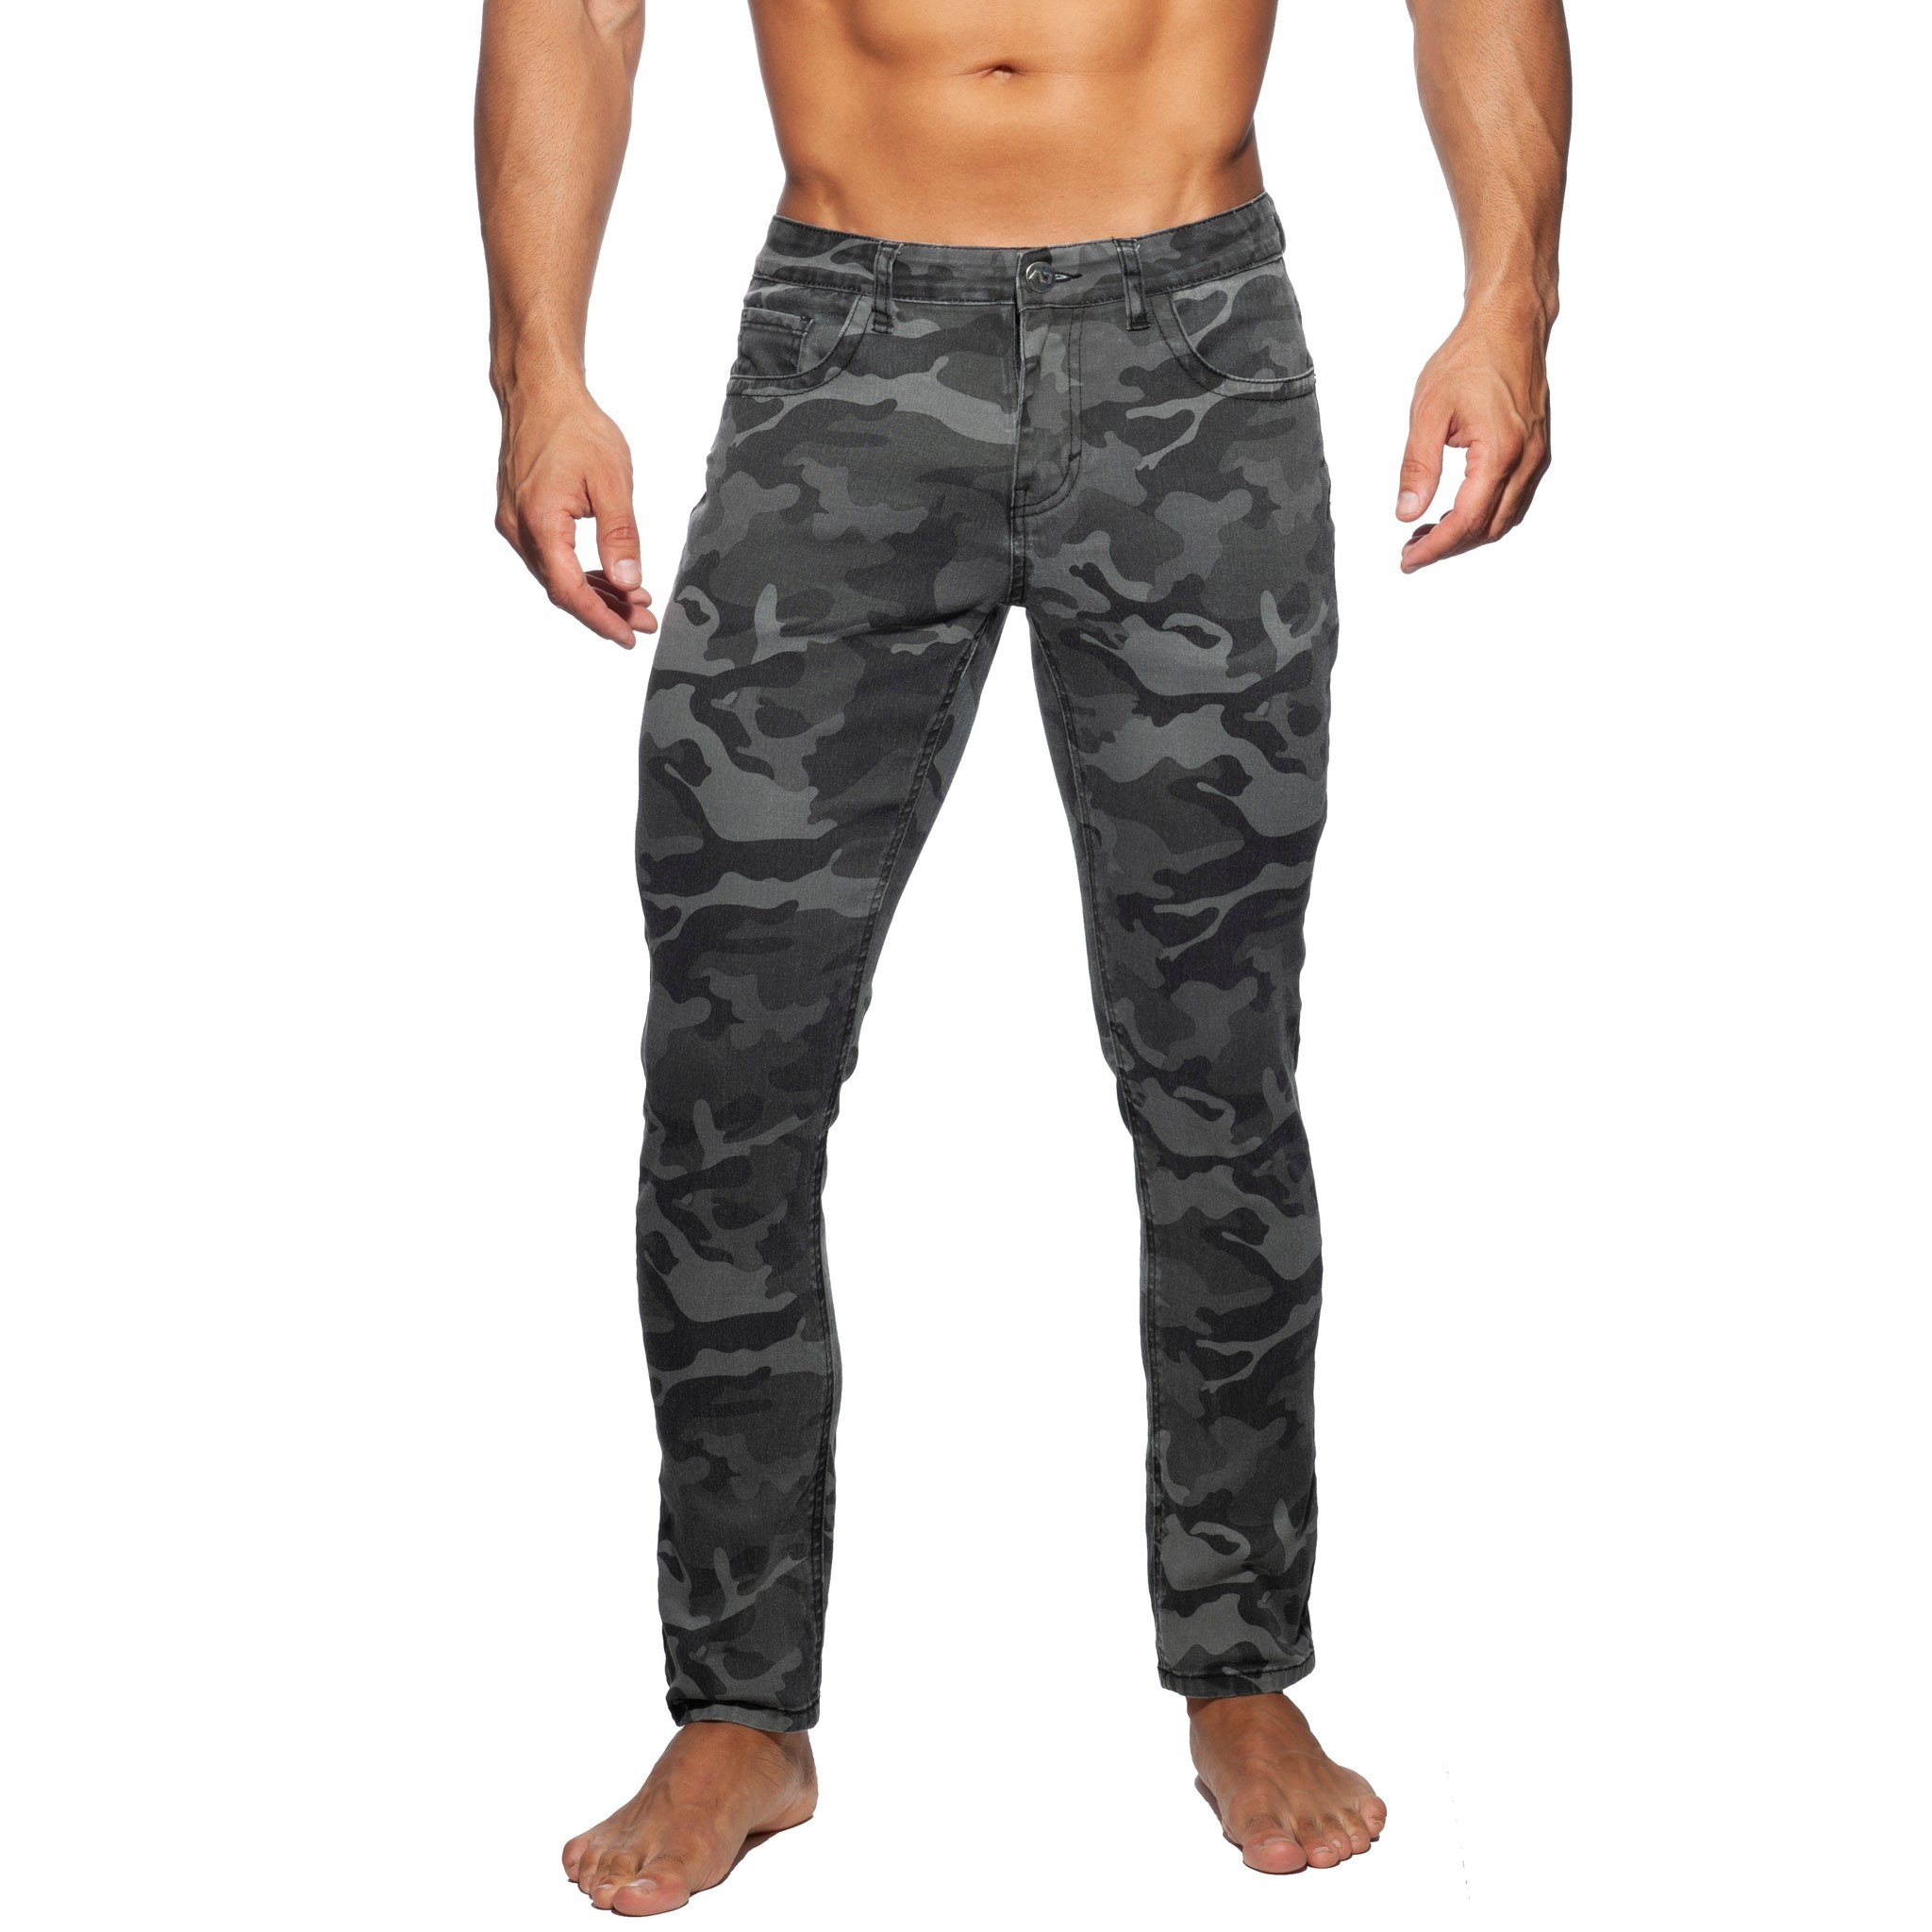 Addicted Camo Jeans Grey Camouflage AD837